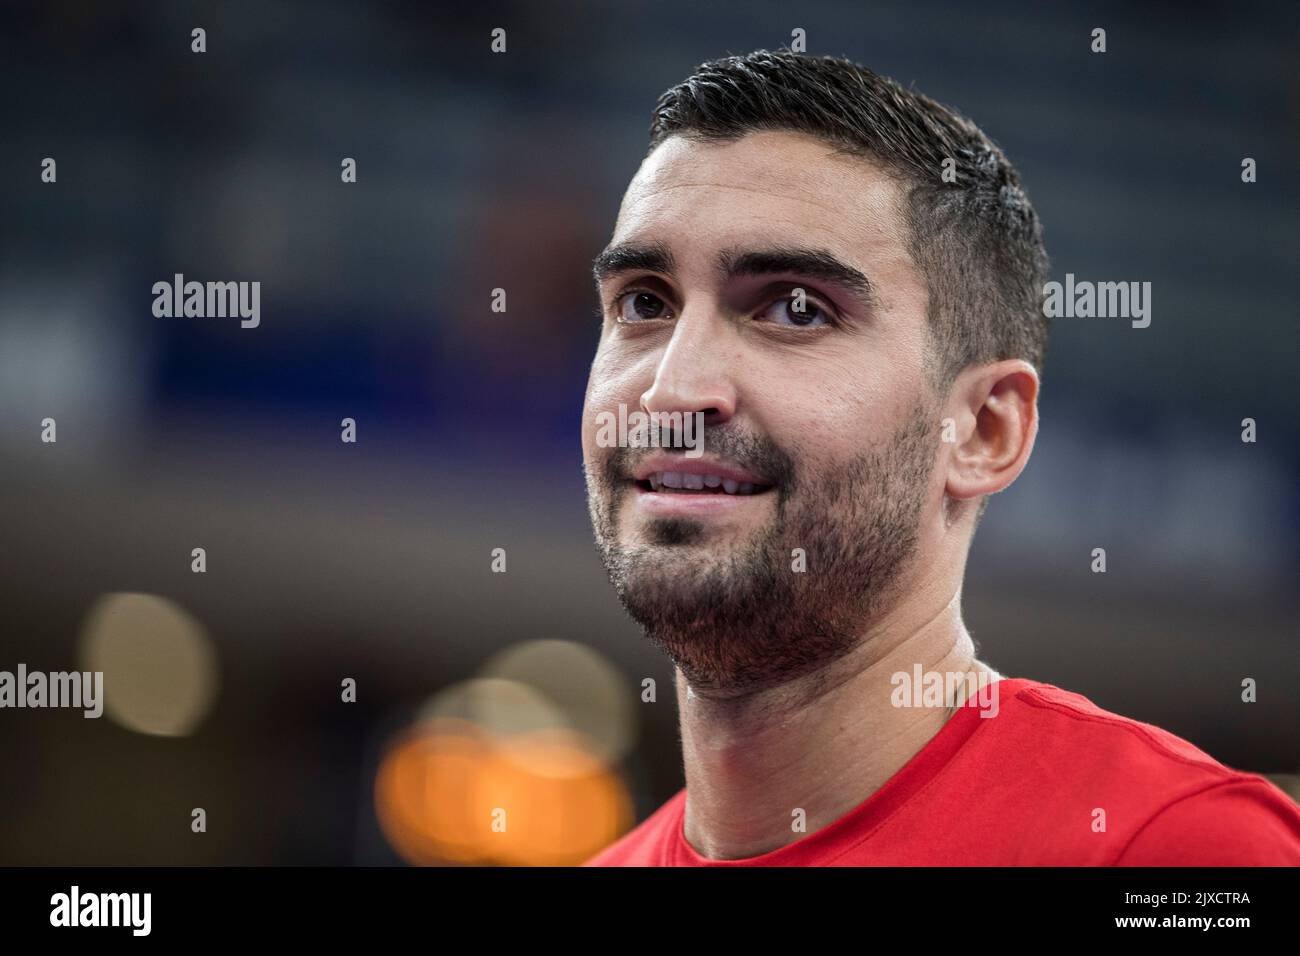 Tbilisi, Georgia, 6th September 2022. Jaime Fernandez of Spain looks on during the FIBA EuroBasket 2022 group A match between Montenegro and Spain at Tbilisi Arena in Tbilisi, Georgia. September 6, 2022. Credit: Nikola Krstic/Alamy Stock Photo